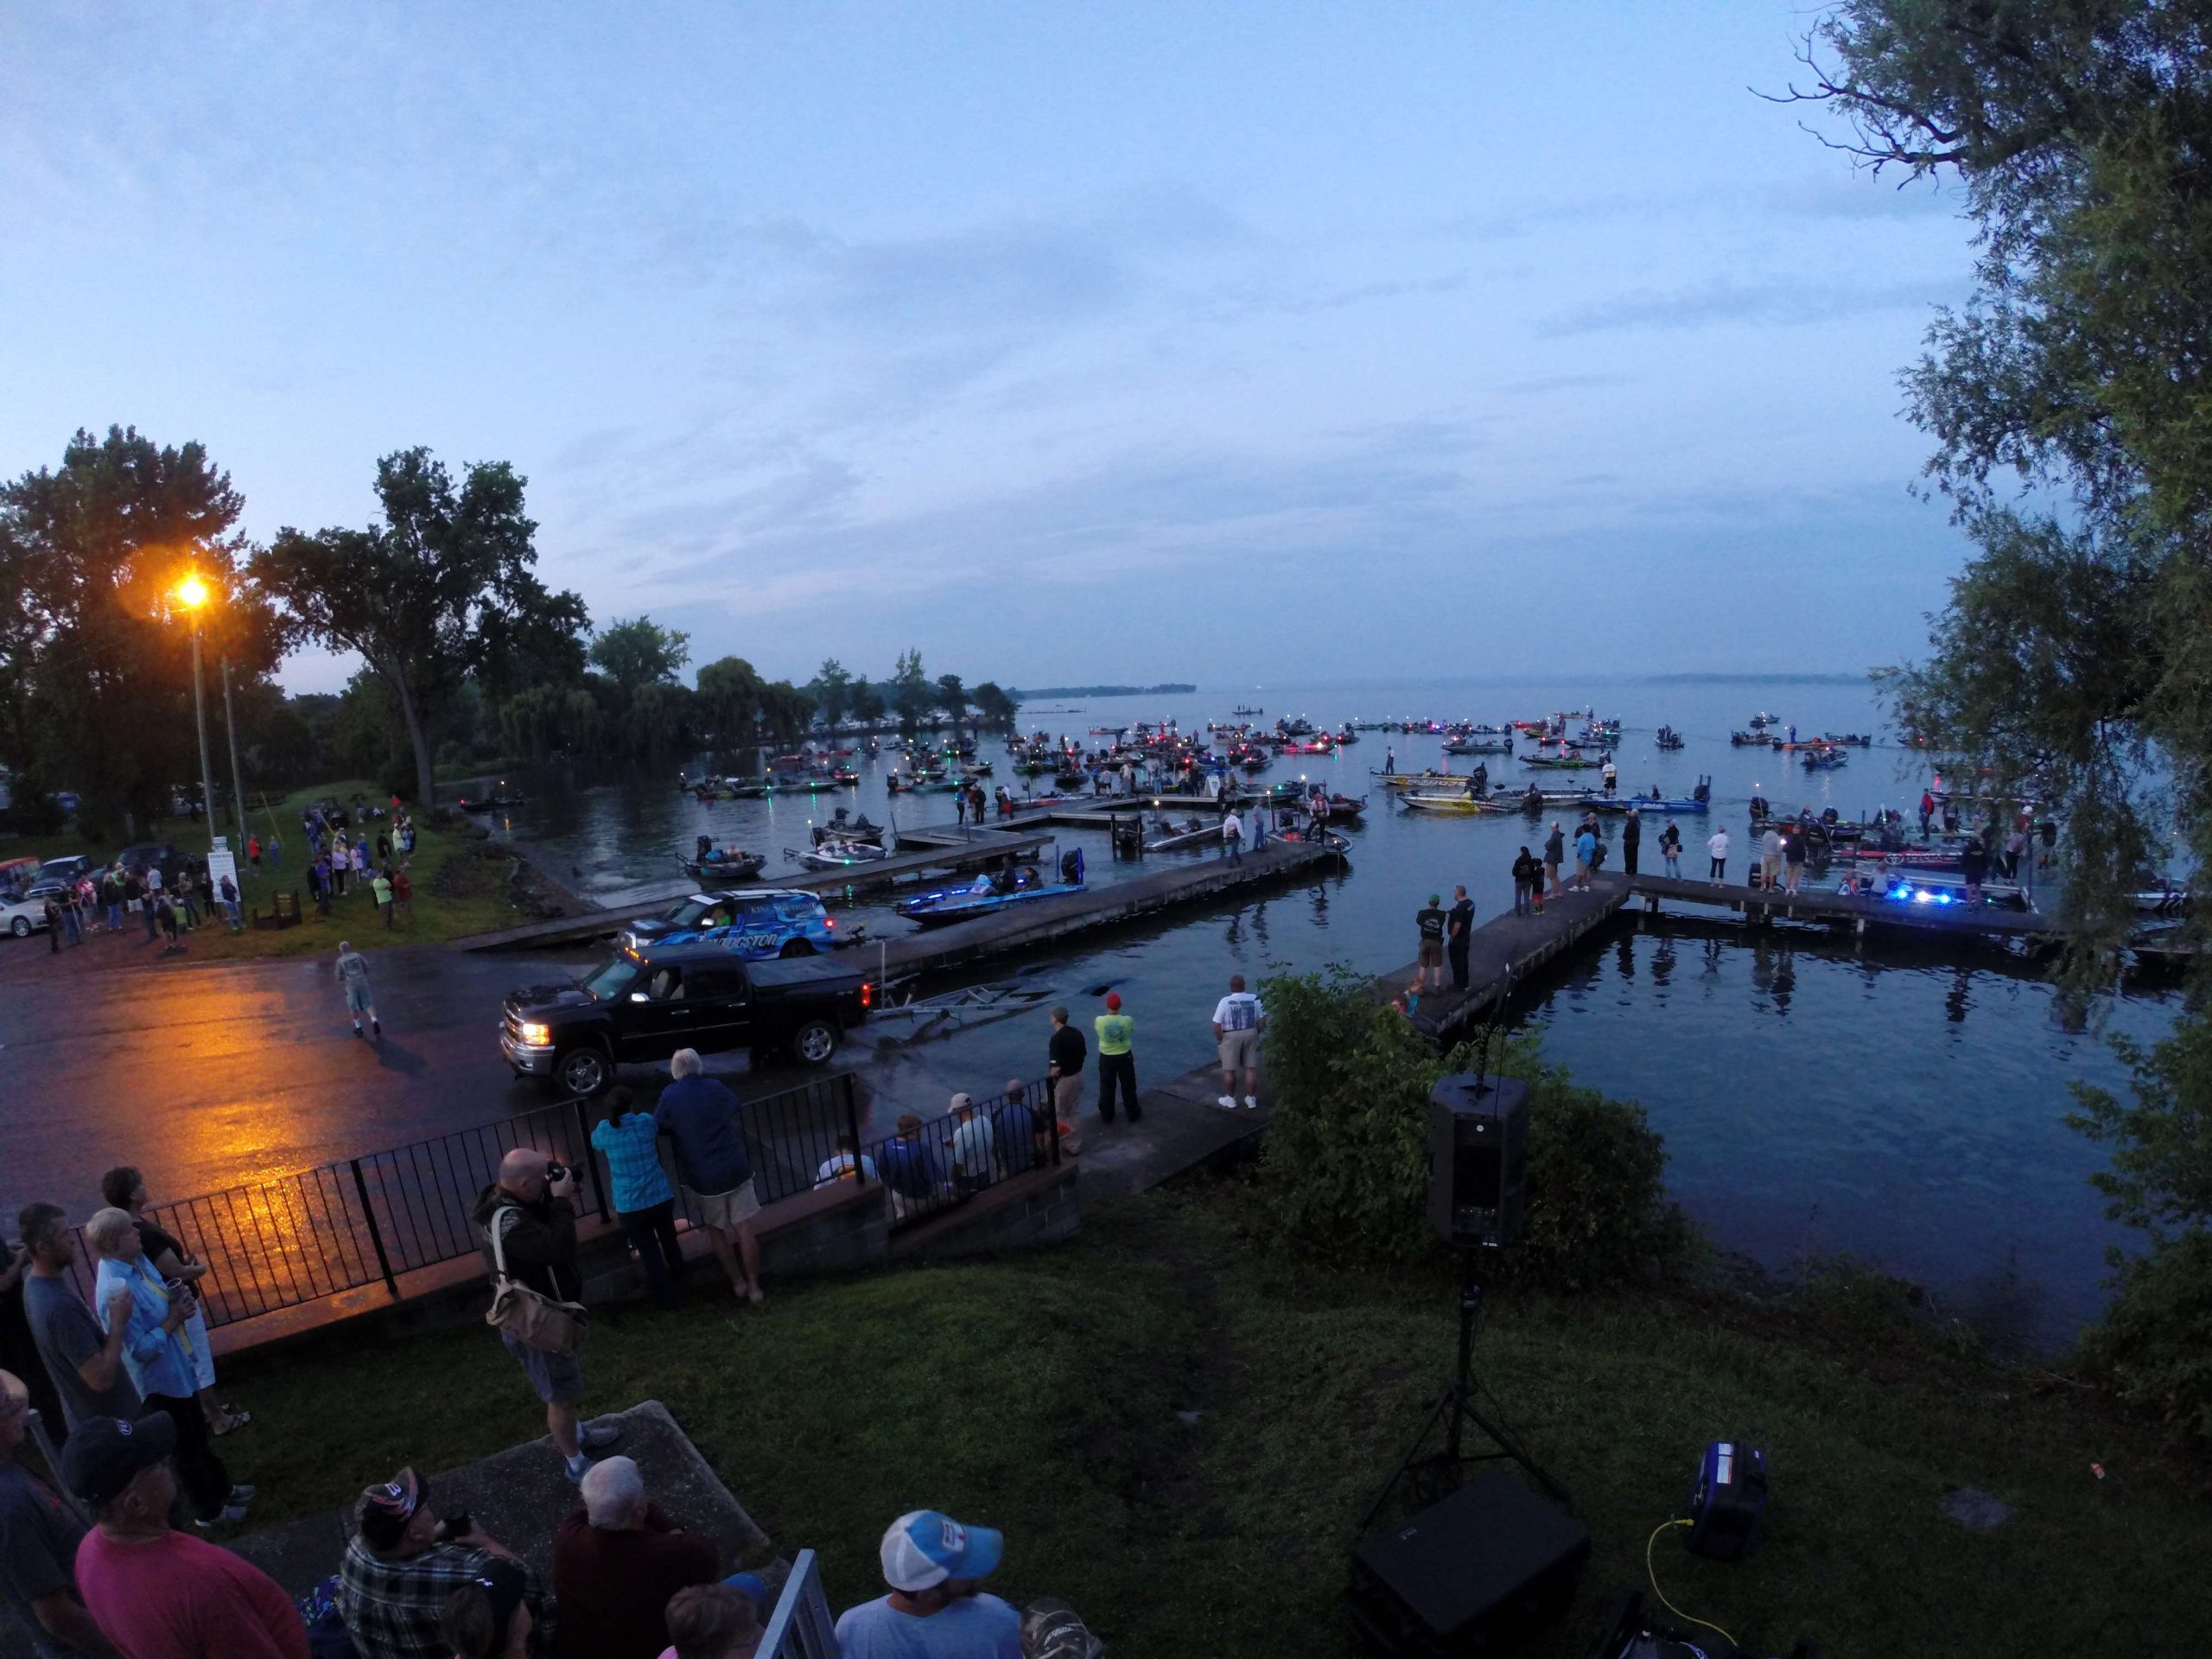 Day 1 launch gets underway for the A.R.E. Truck Caps Bassmaster Elite at Cayuga Lake.